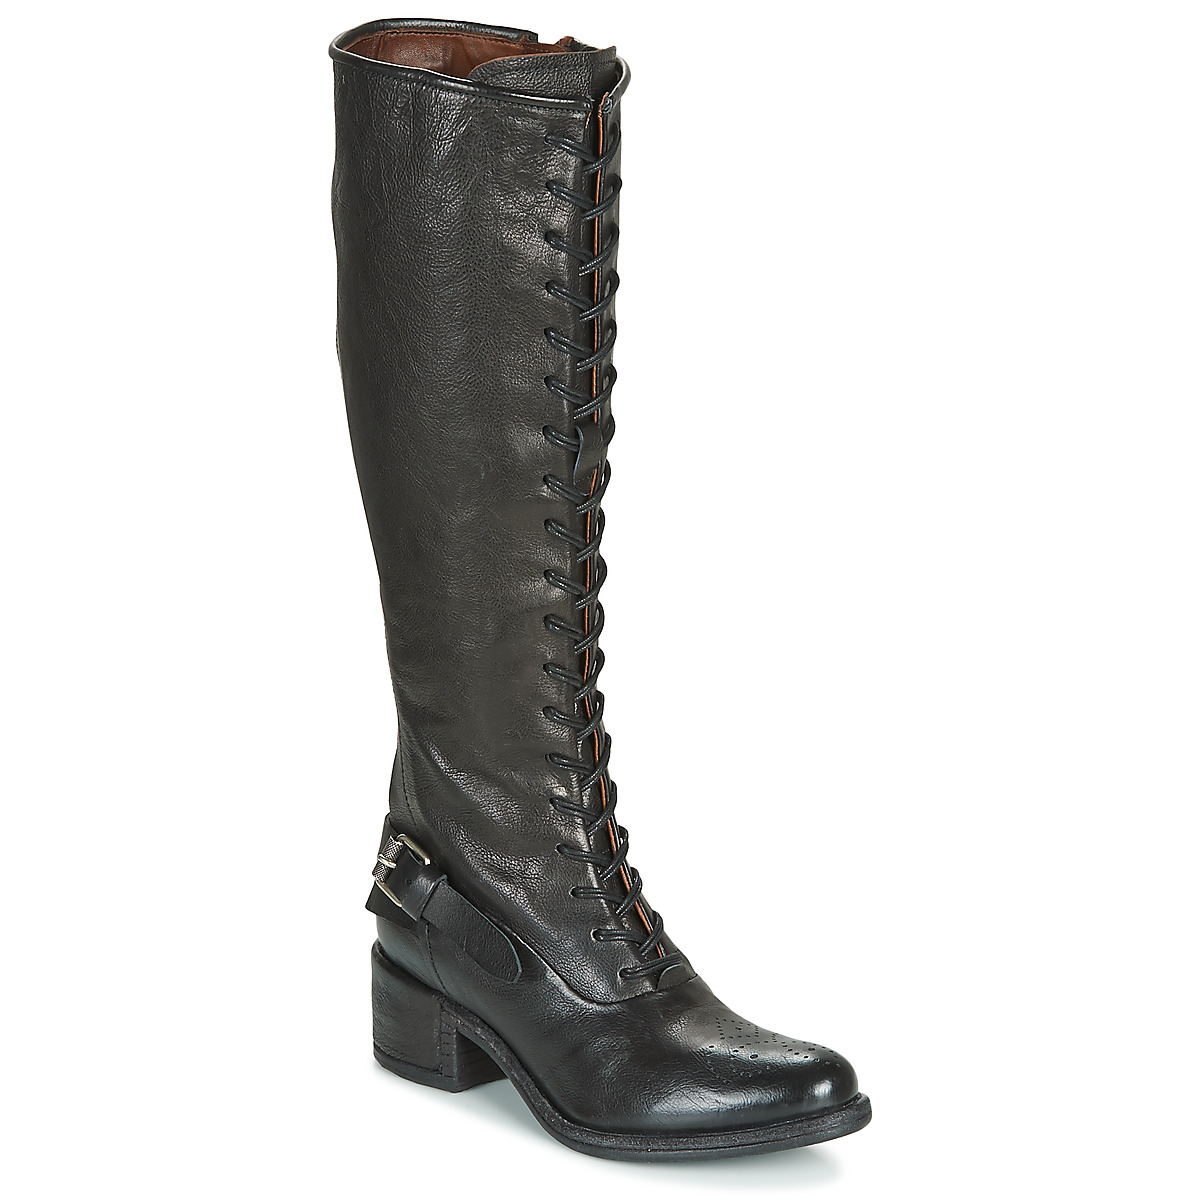 airstep / a.s.98  opea lace  women's high boots in black